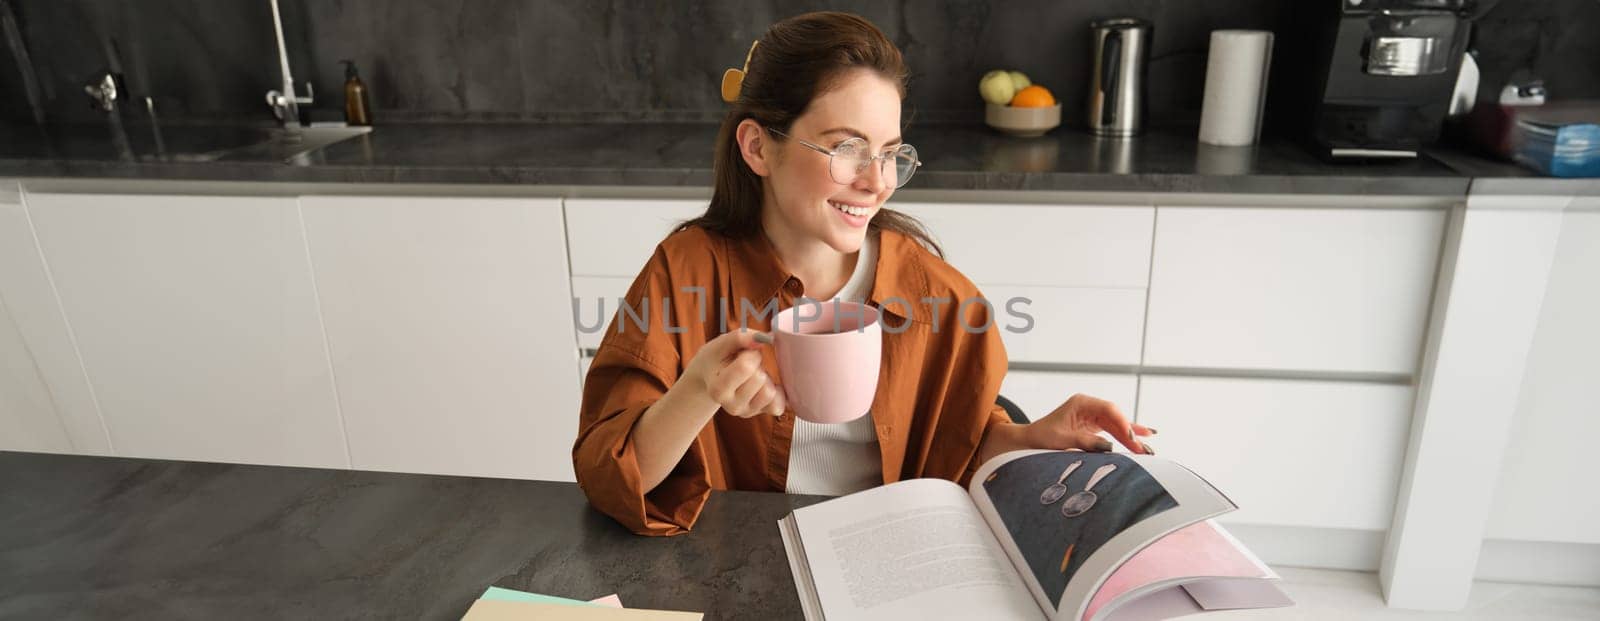 Portrait of young woman enjoying her weekend, reading a book and drinking tea at home, wearing glasses and casual clothes.